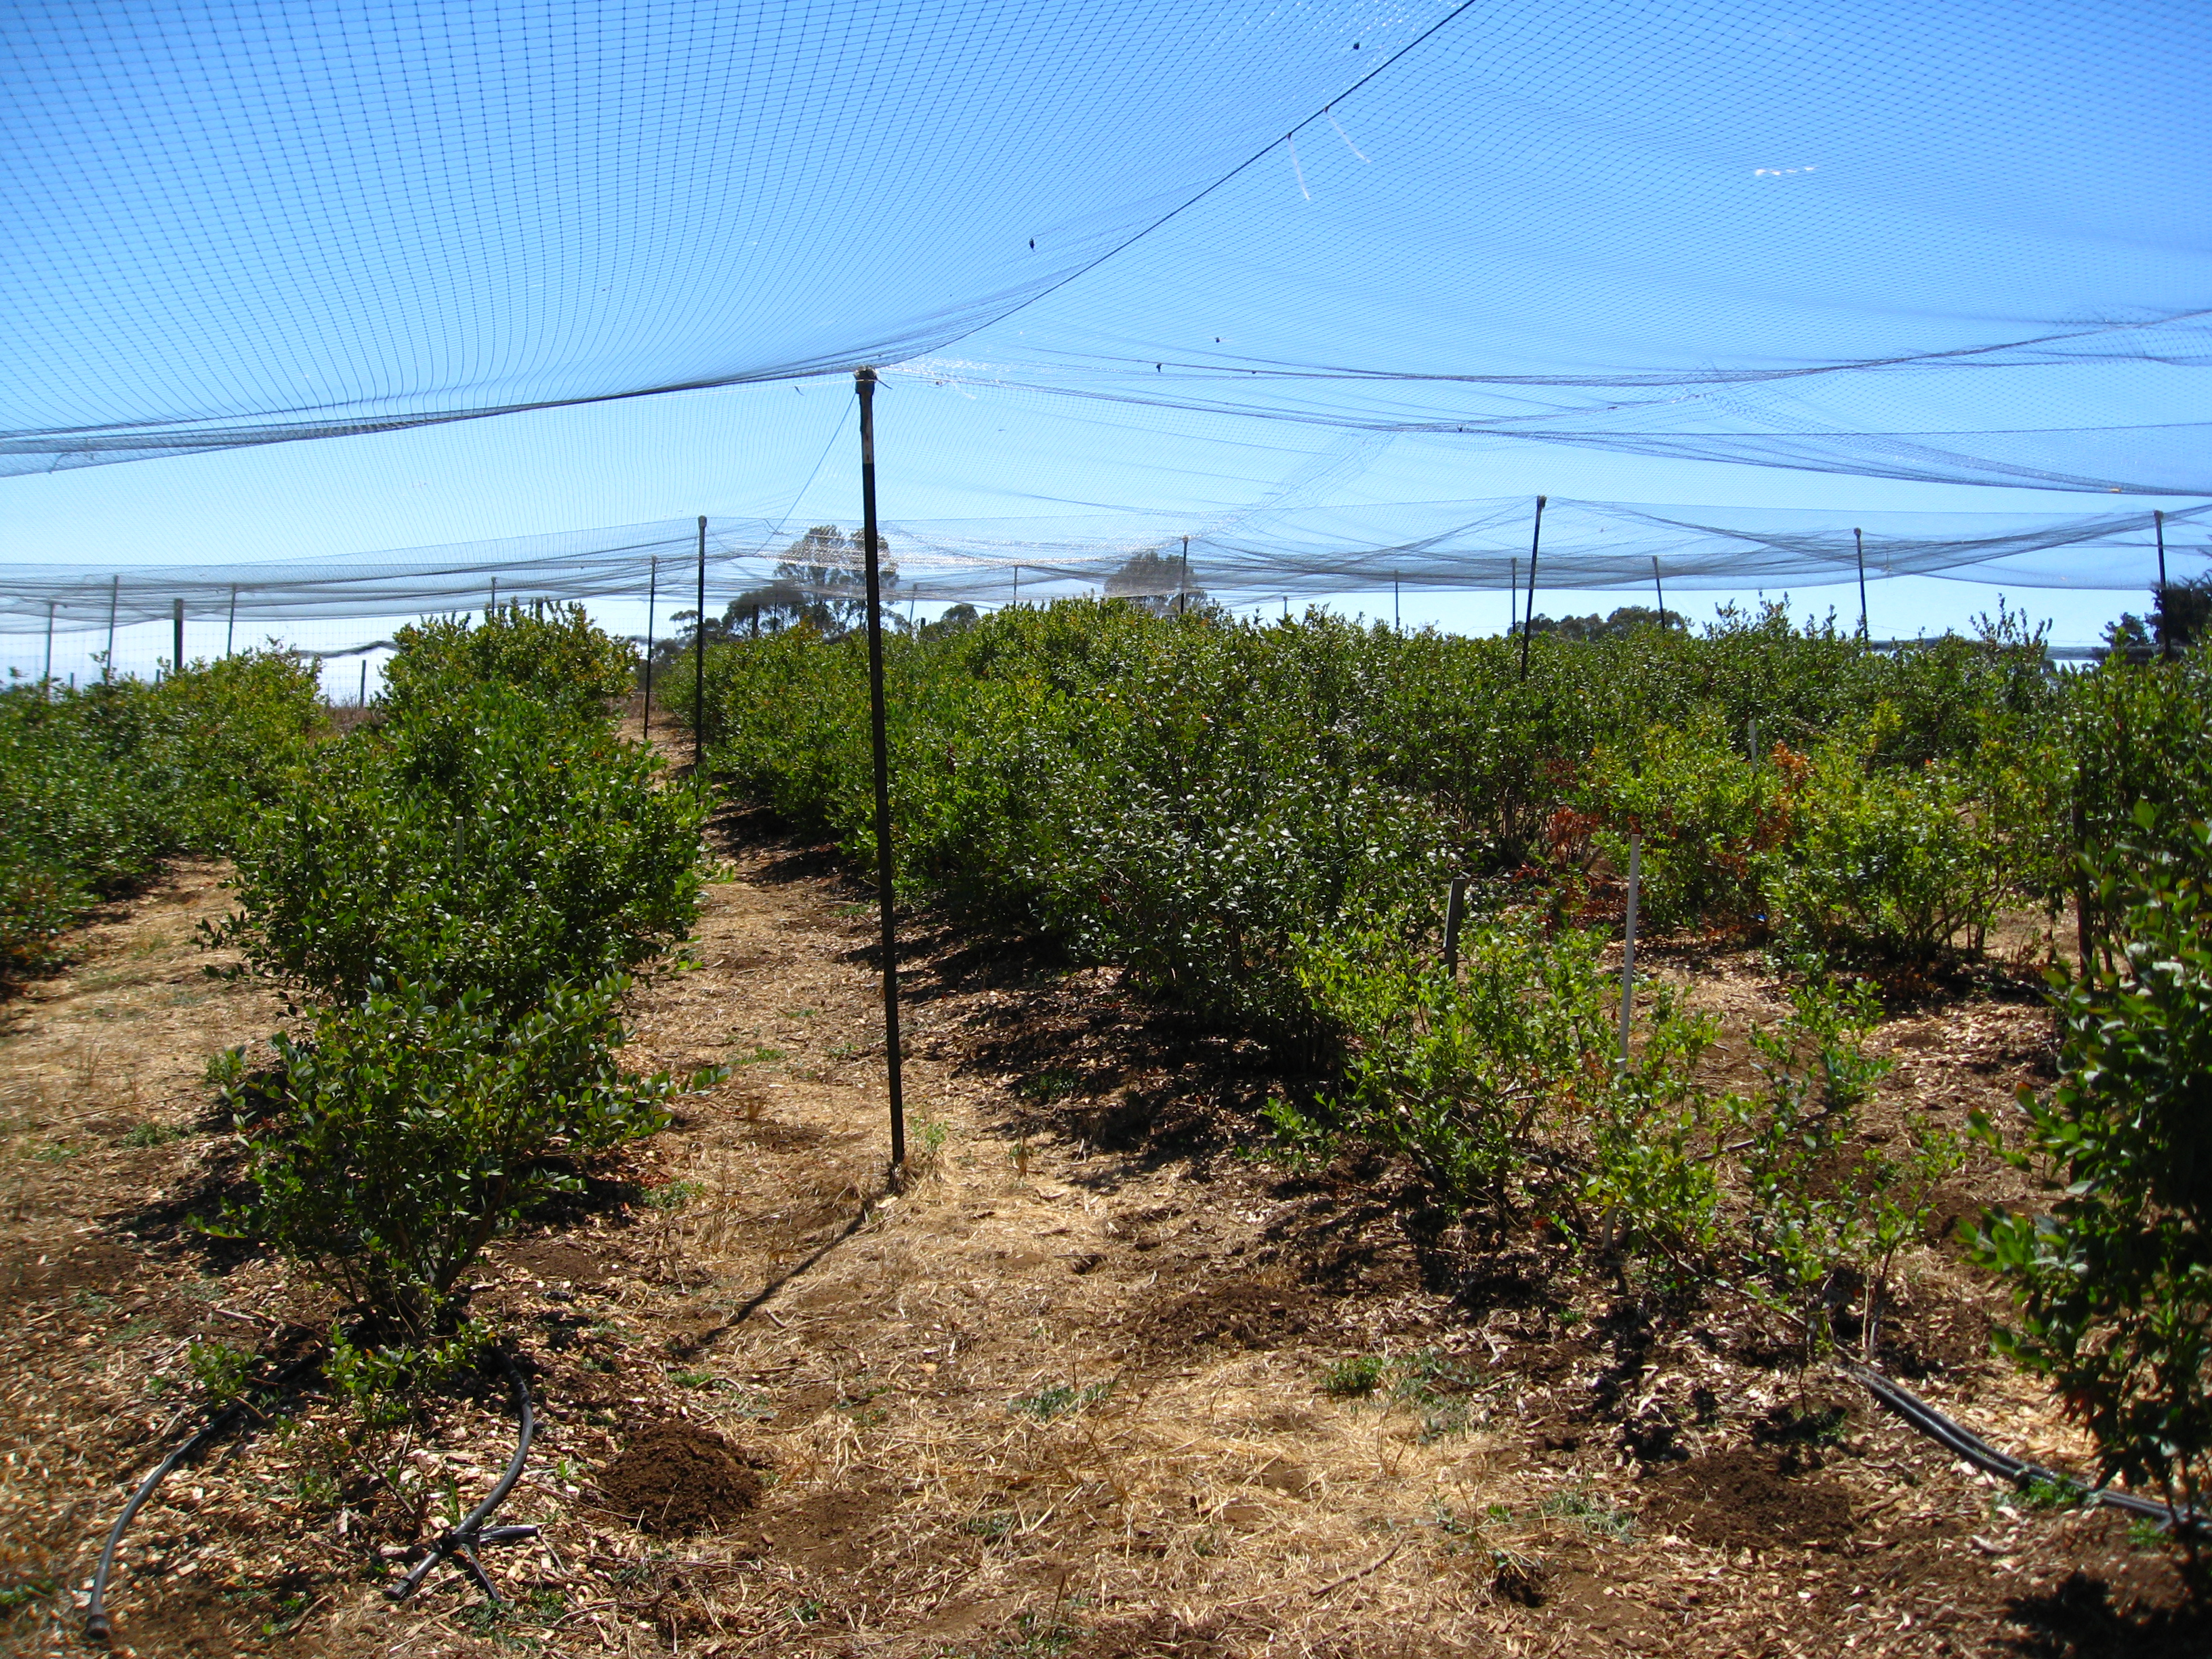 Blueberries at the UC Santa Cruz CASFS farm being watered with apple cider vinegar made from the farms fallen apples.